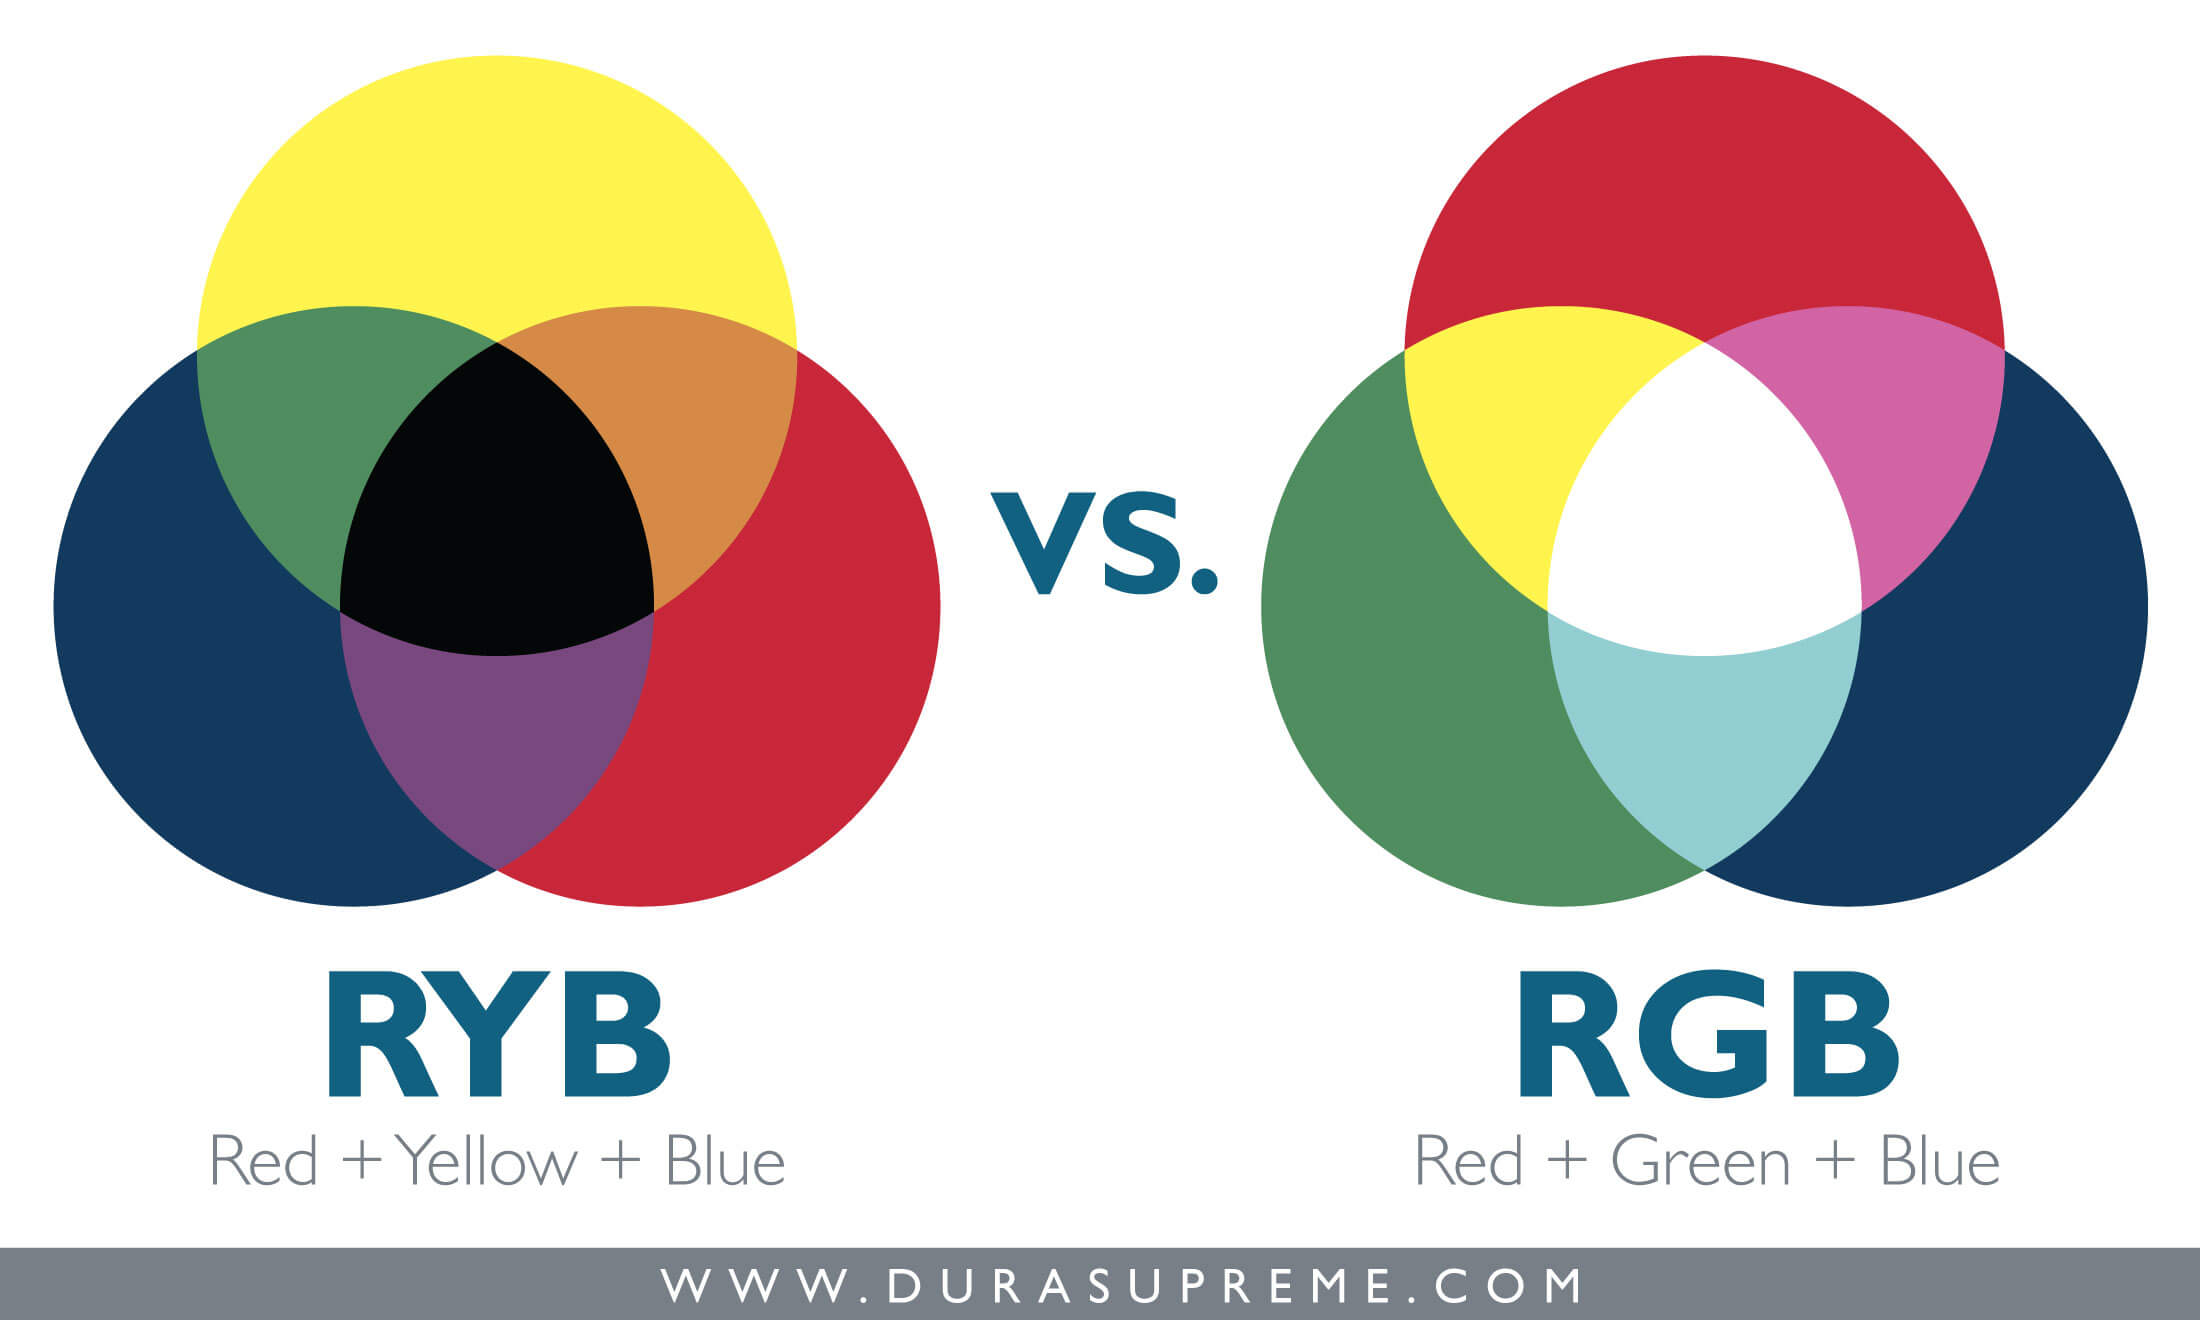 Color Theory Lessons for Interior design. RYB paint colors vs. RGB screen/light colors.